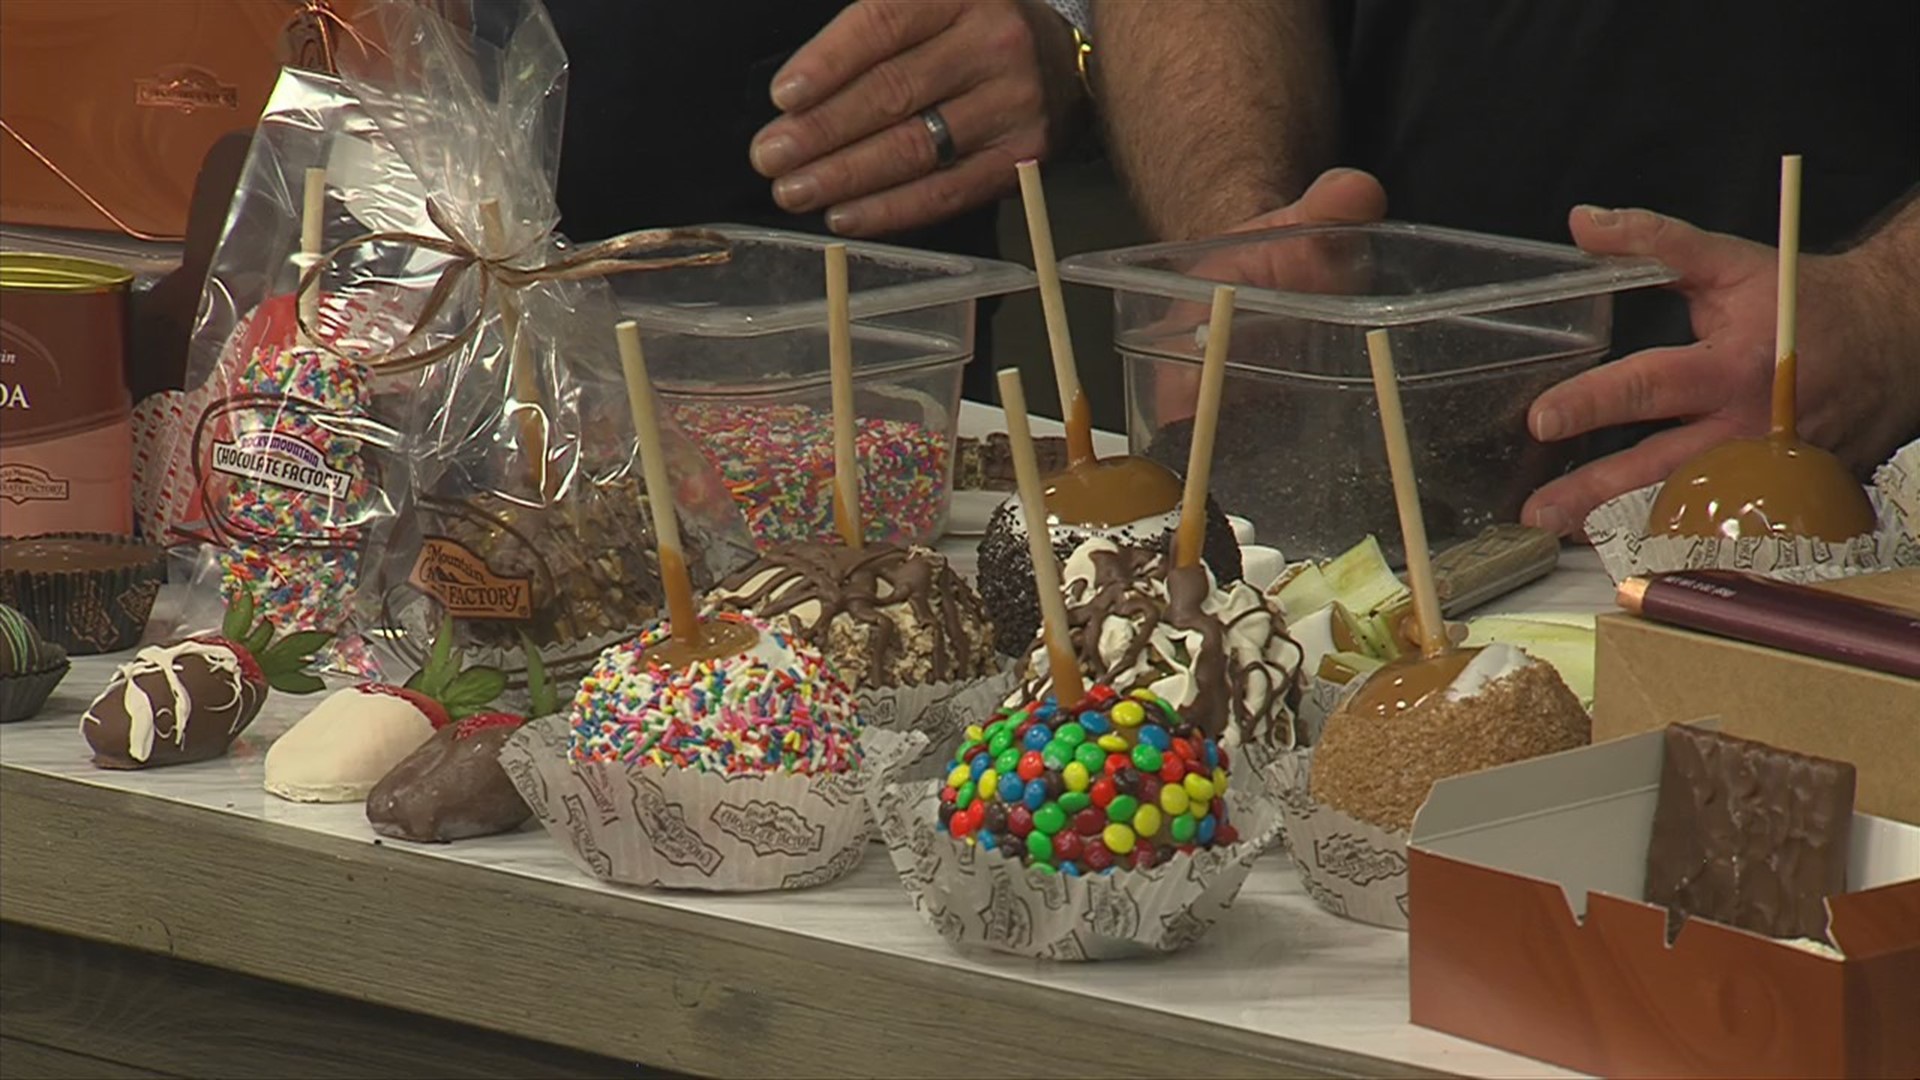 Caramel apples and chocolates make great holiday gifts